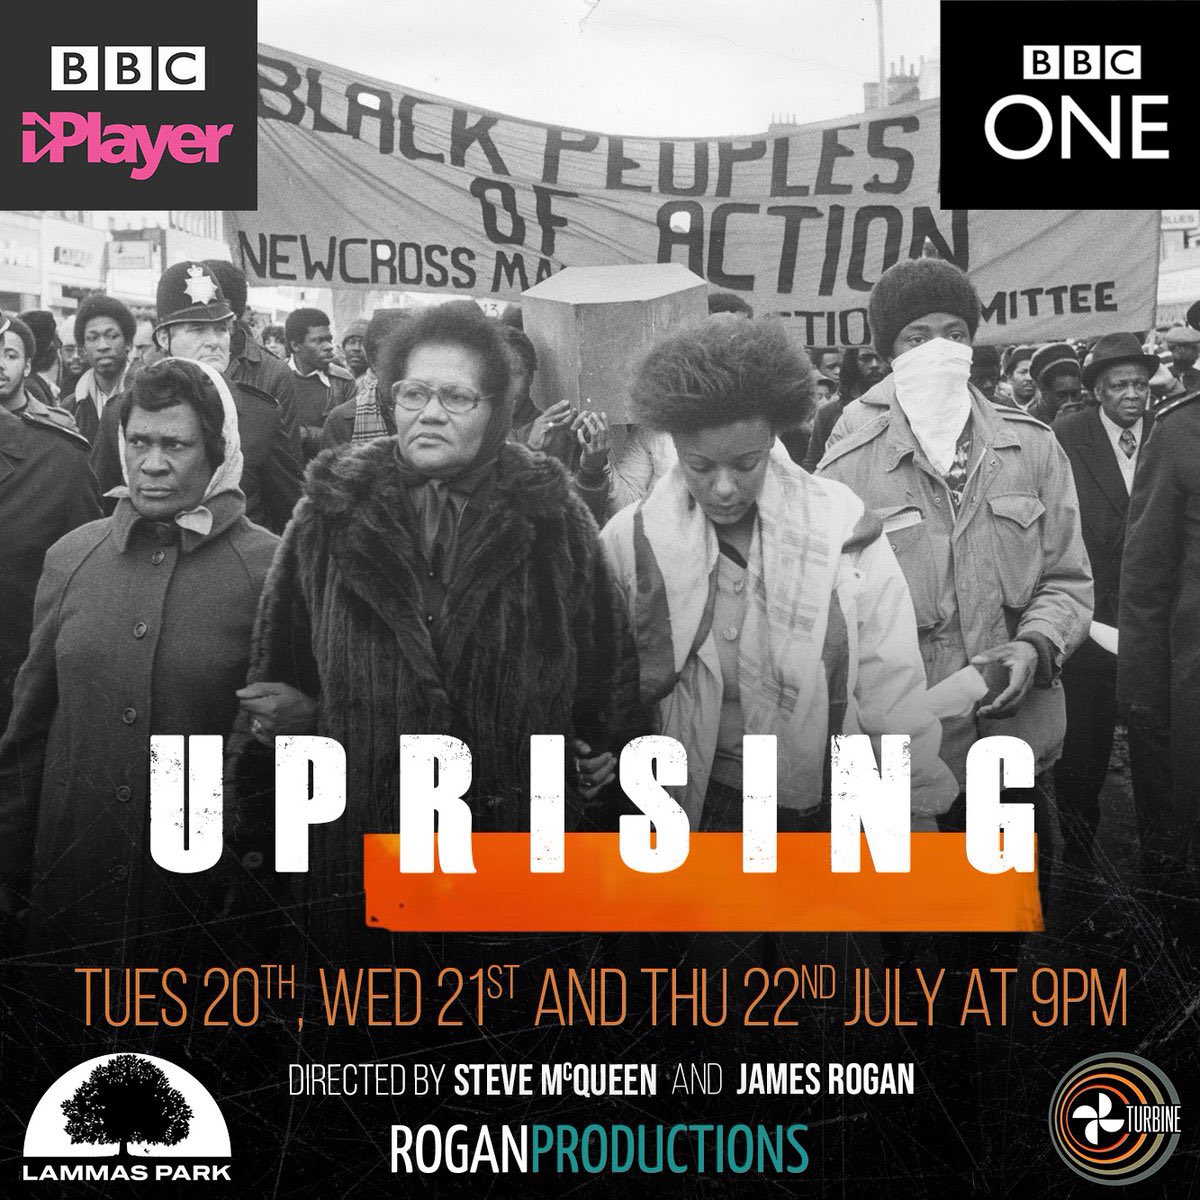 Been watching this on I Player I feel utterly sick to my stomach that I was once a racist I’m ashamed of my past beliefs I can’t change the past but will  do whatever I can to combat racism in all it’s forms and will do so for the rest of my life 
#racistengland #Uprising